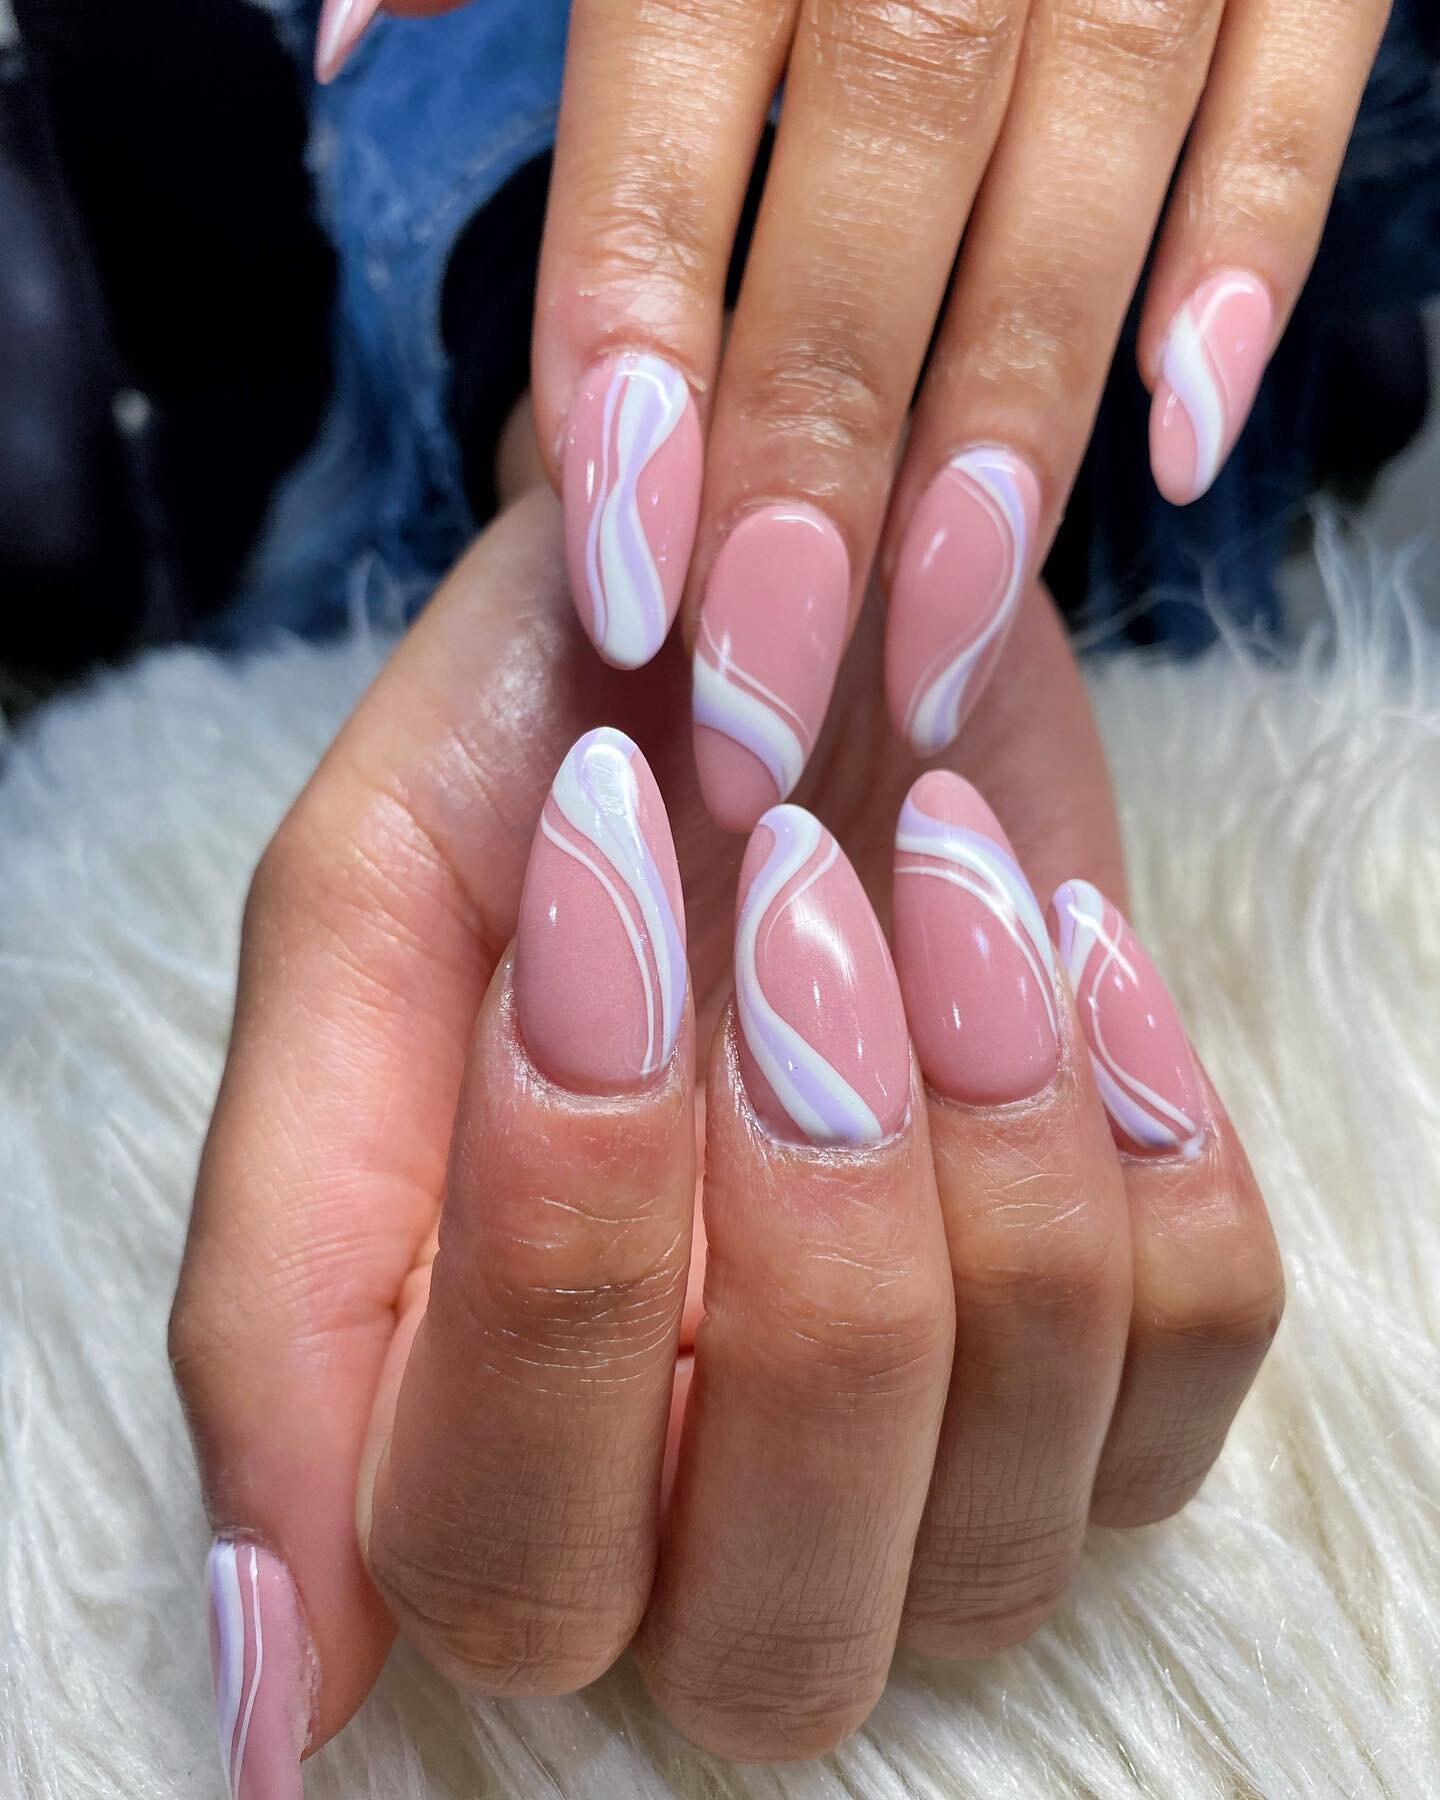 Obsessed with these nails! 💅🏼